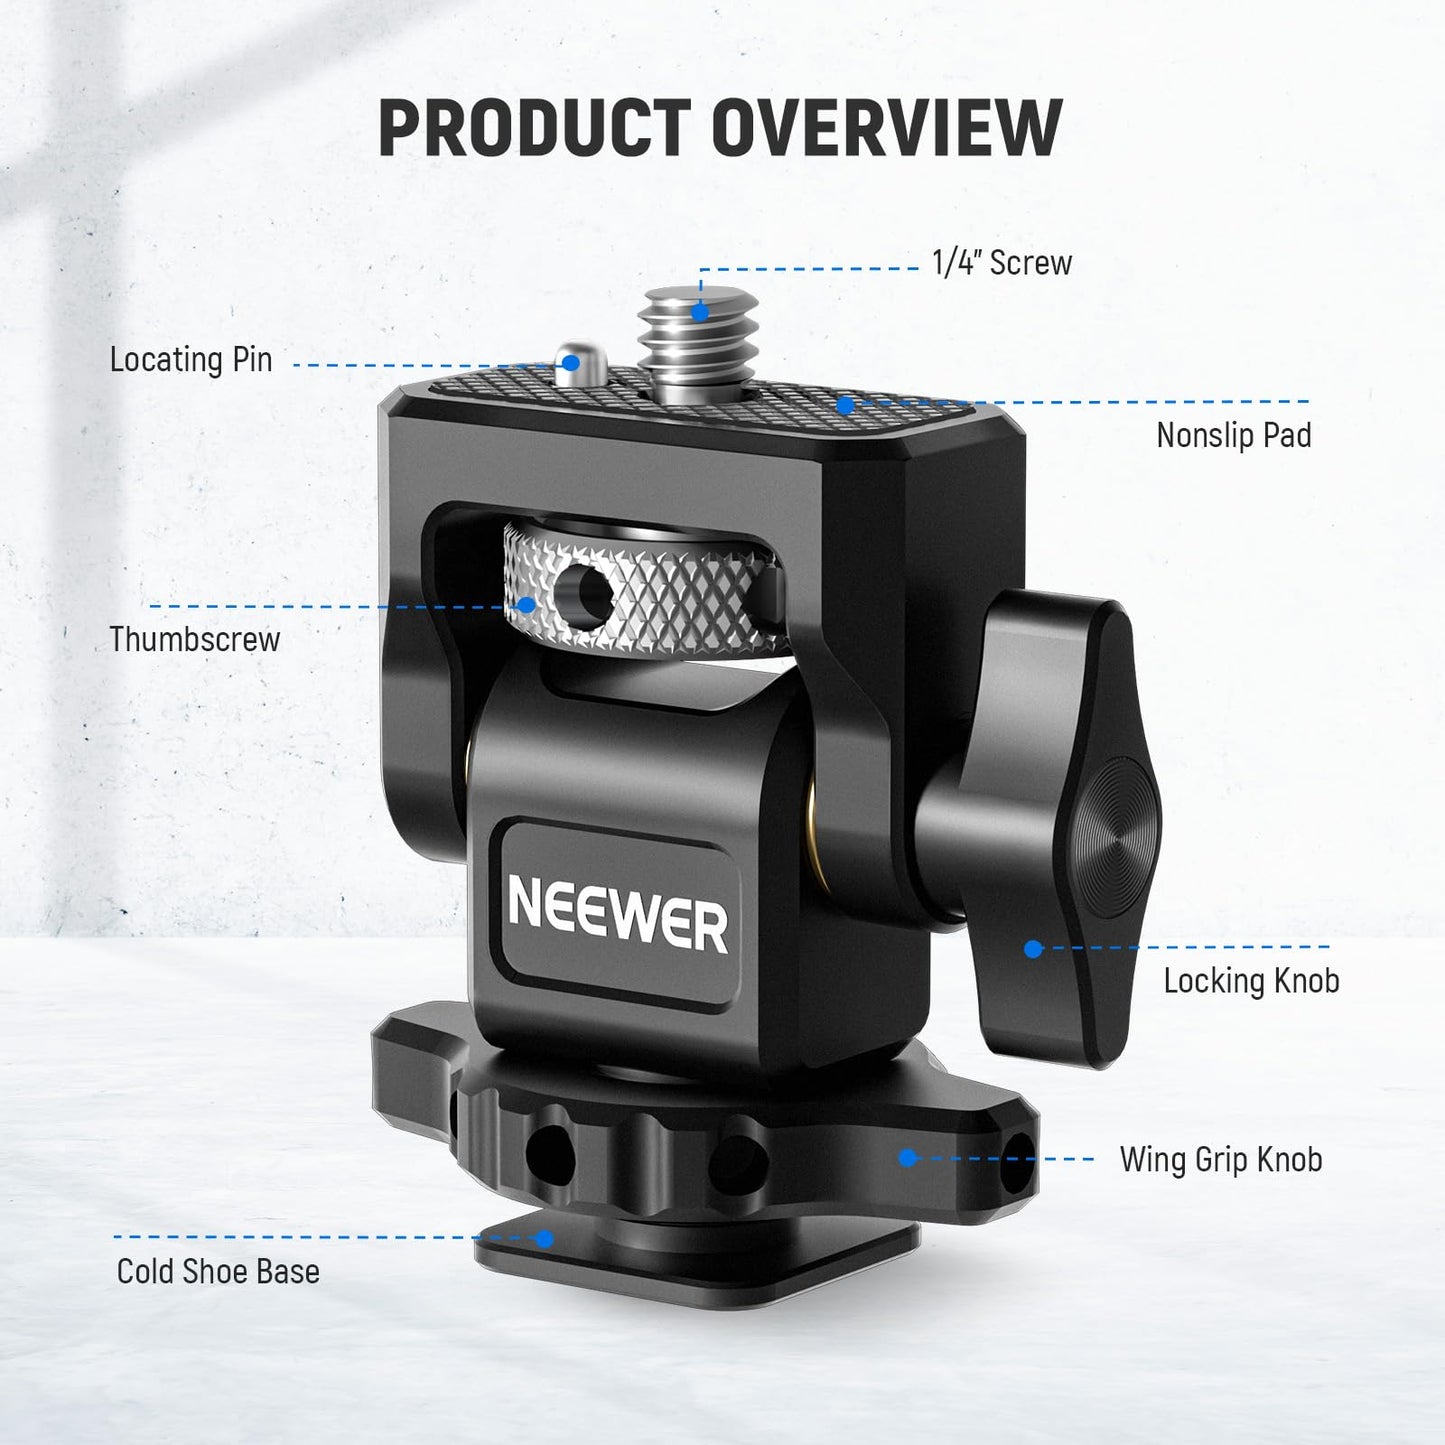 NEEWER Camera Monitor Mount with Cold Shoe, Anti Twist 1/4" Screw for 5" & 7" Field Monitor Compatible with Atomos Ninja V, 360° Swivel & Adjustable 180° Tilt Damping, Compatible with SmallRig, MA006